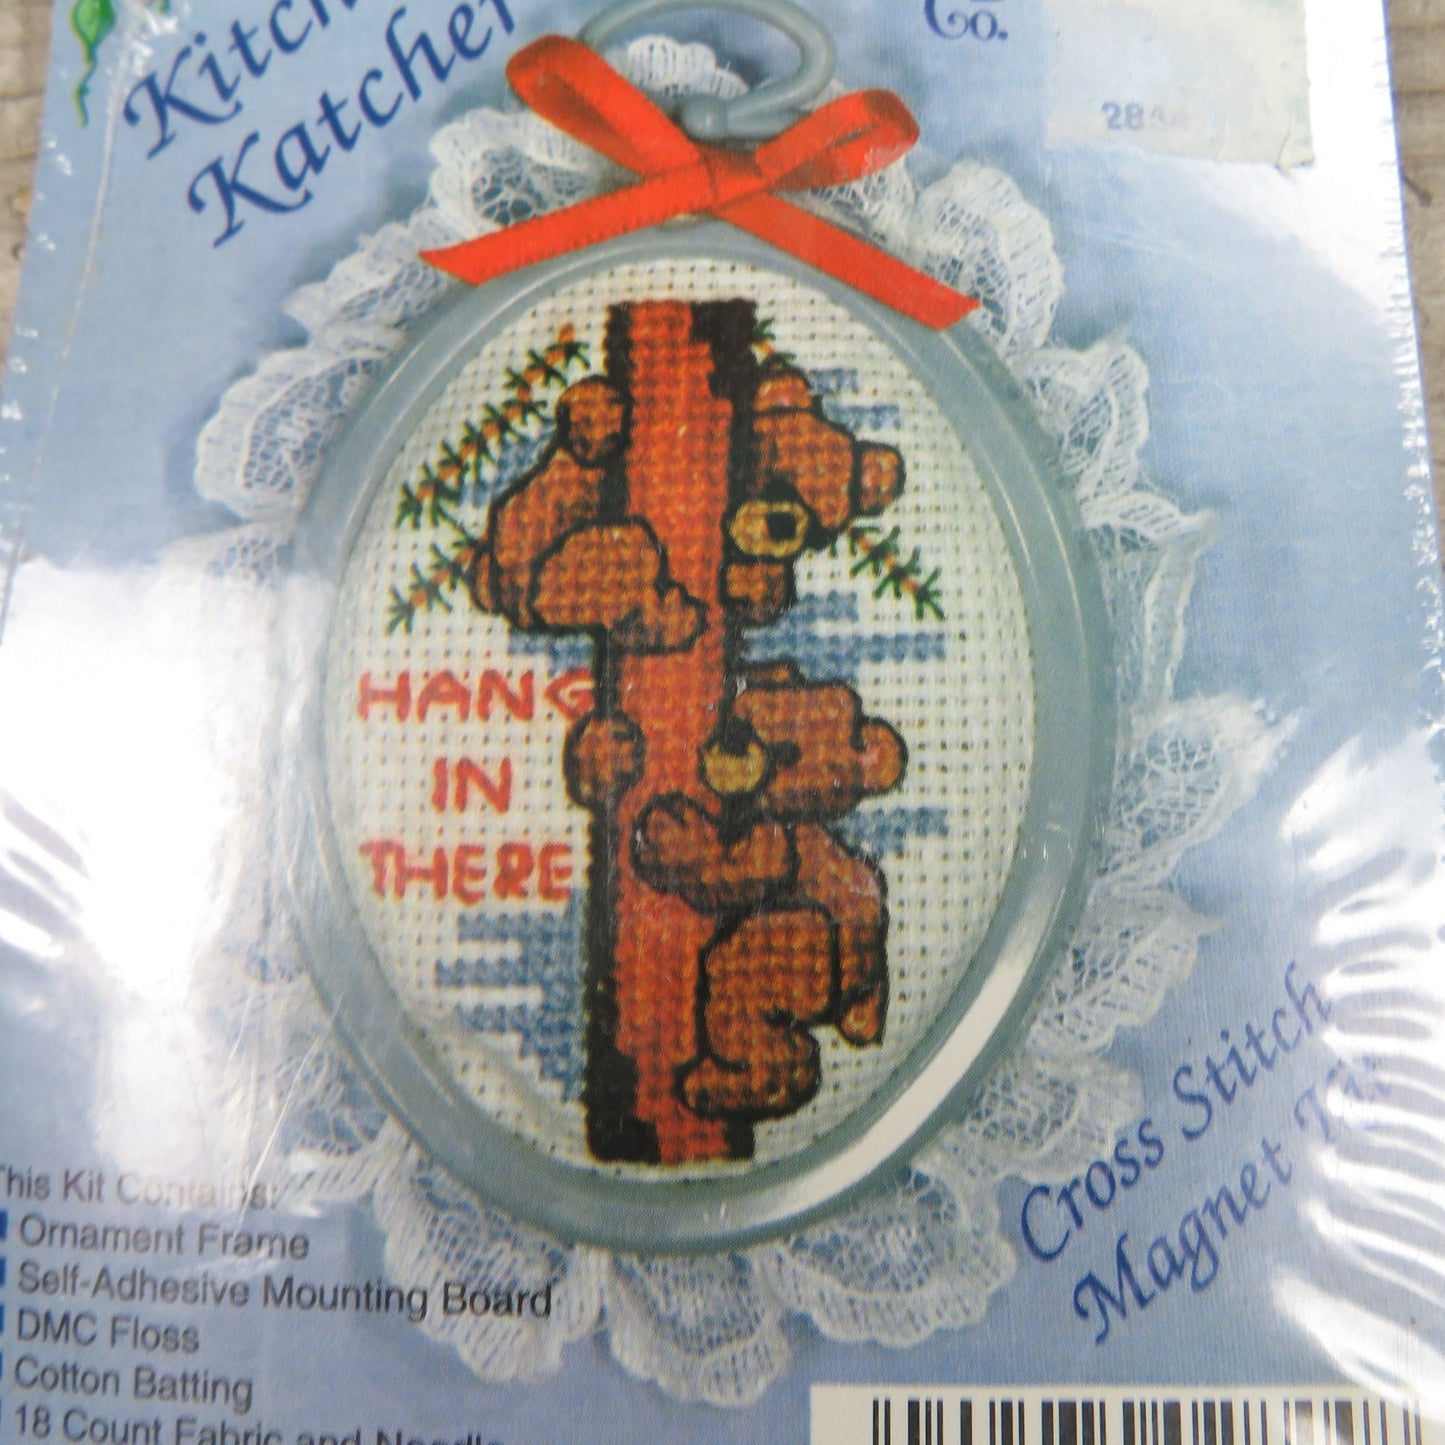 Bears Framed Cross Stitch Magnet Kit Hang In There Ornament New Berlin Co Kitchen Katcher USA